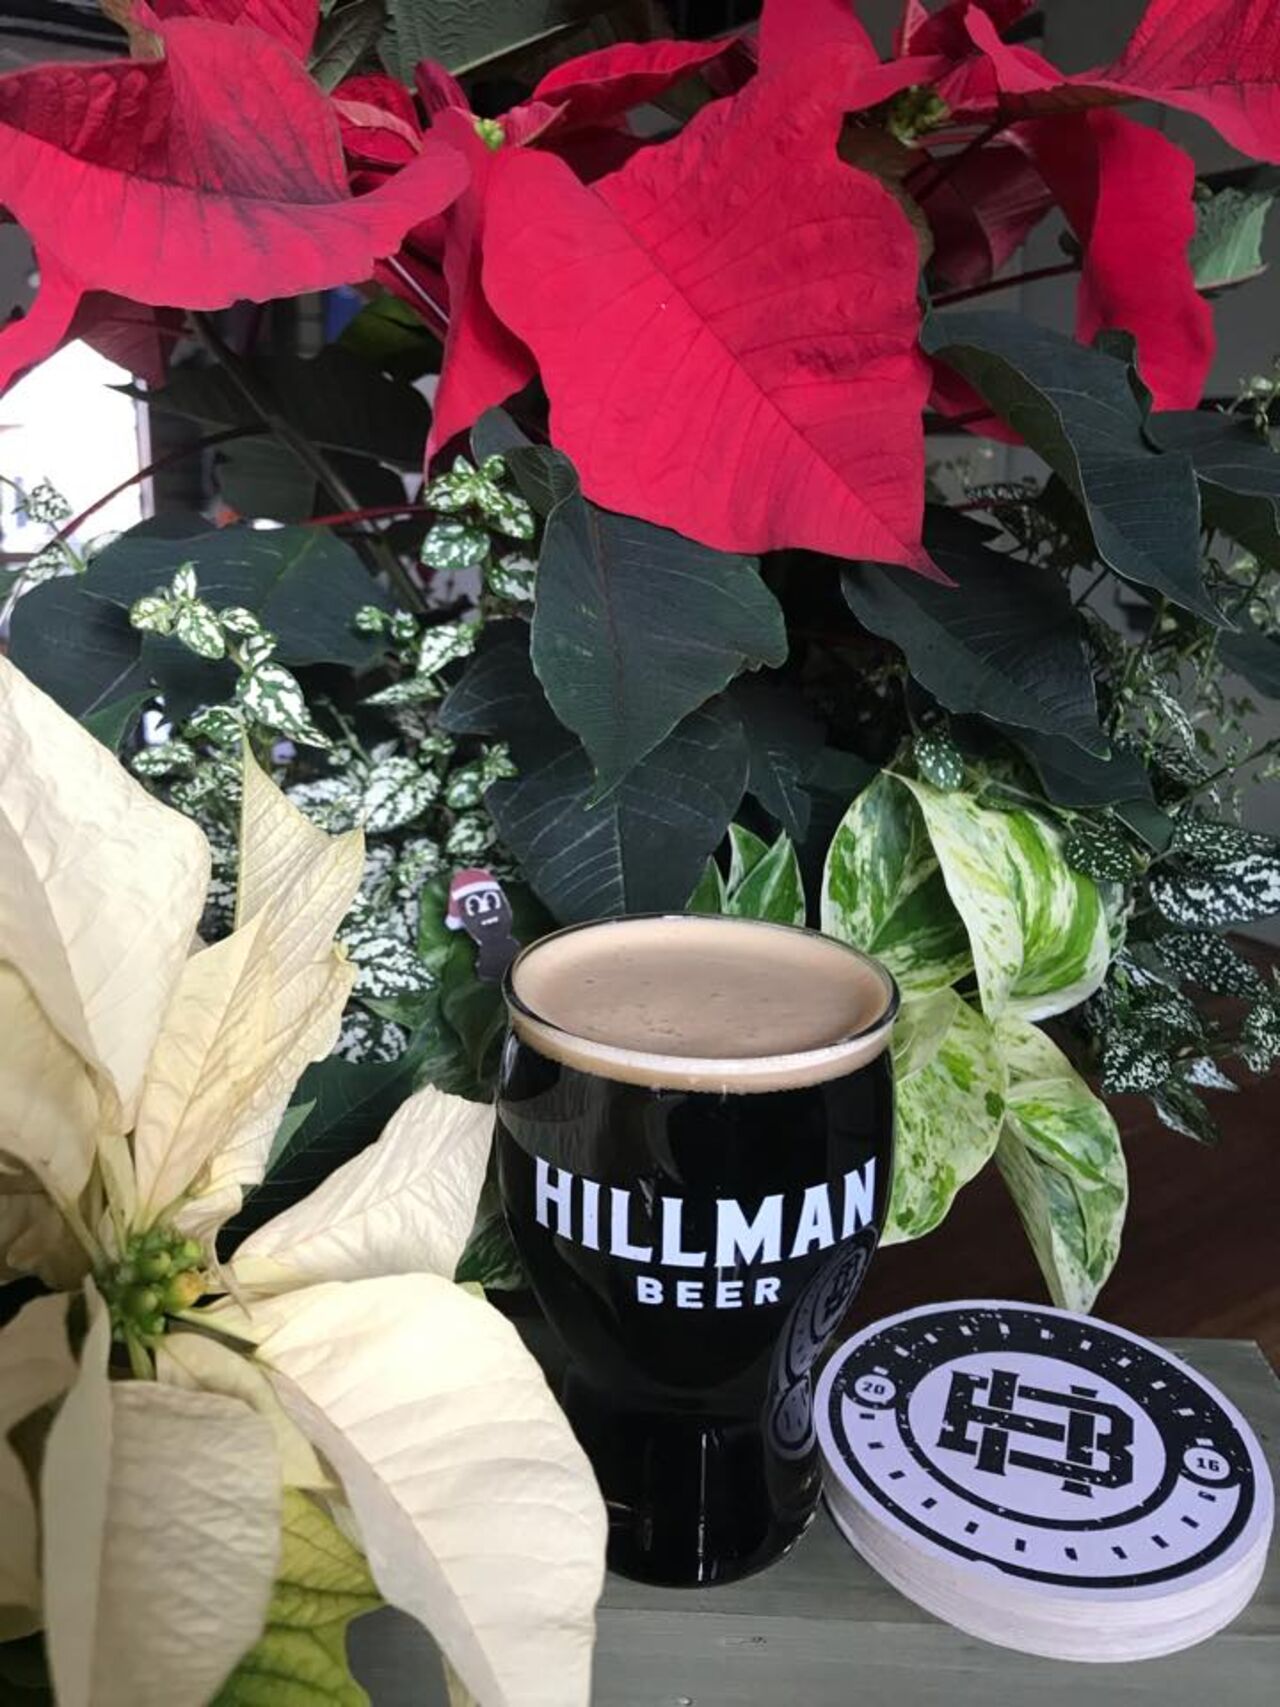 A photo of Hillman Beer